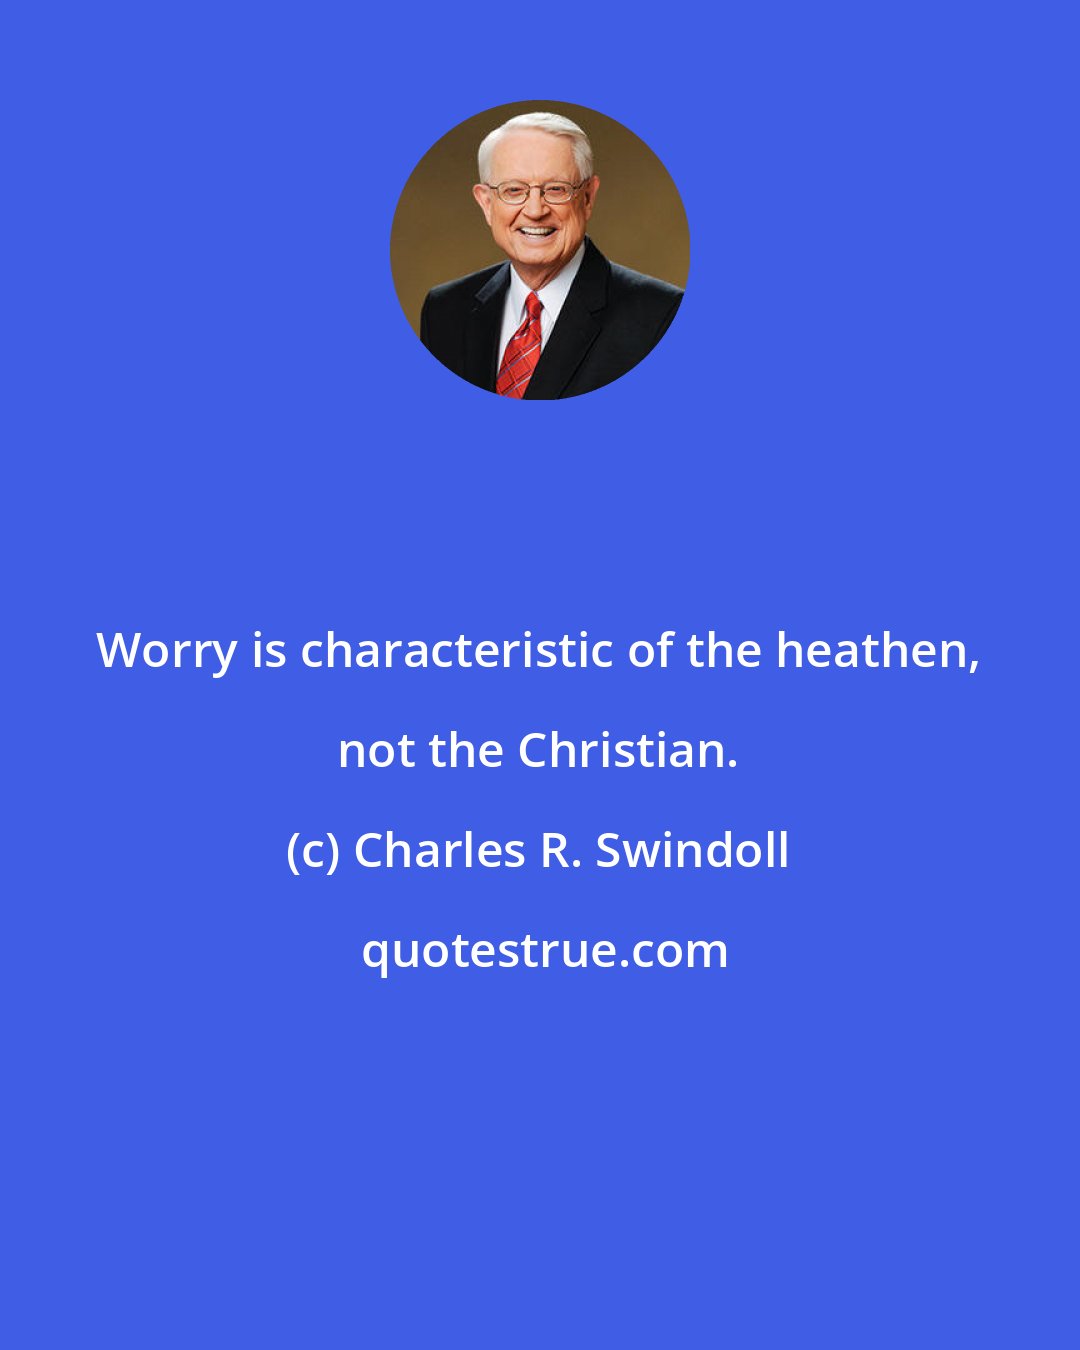 Charles R. Swindoll: Worry is characteristic of the heathen, not the Christian.